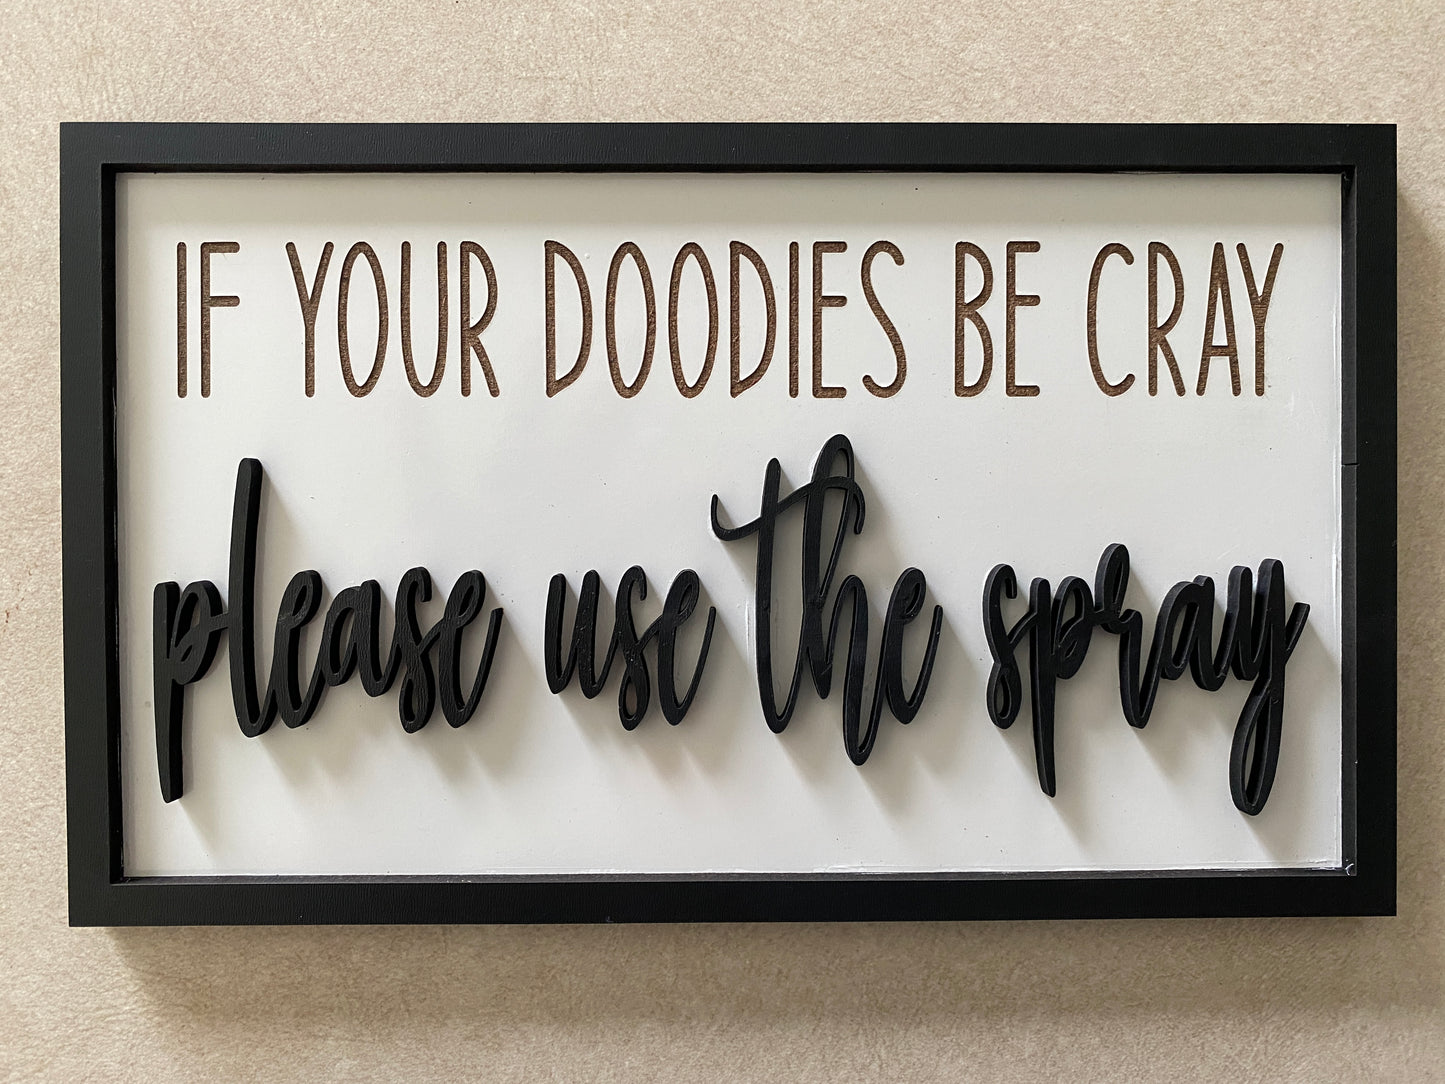 If Your Dooties Be Cray, Please Use The Spray sign